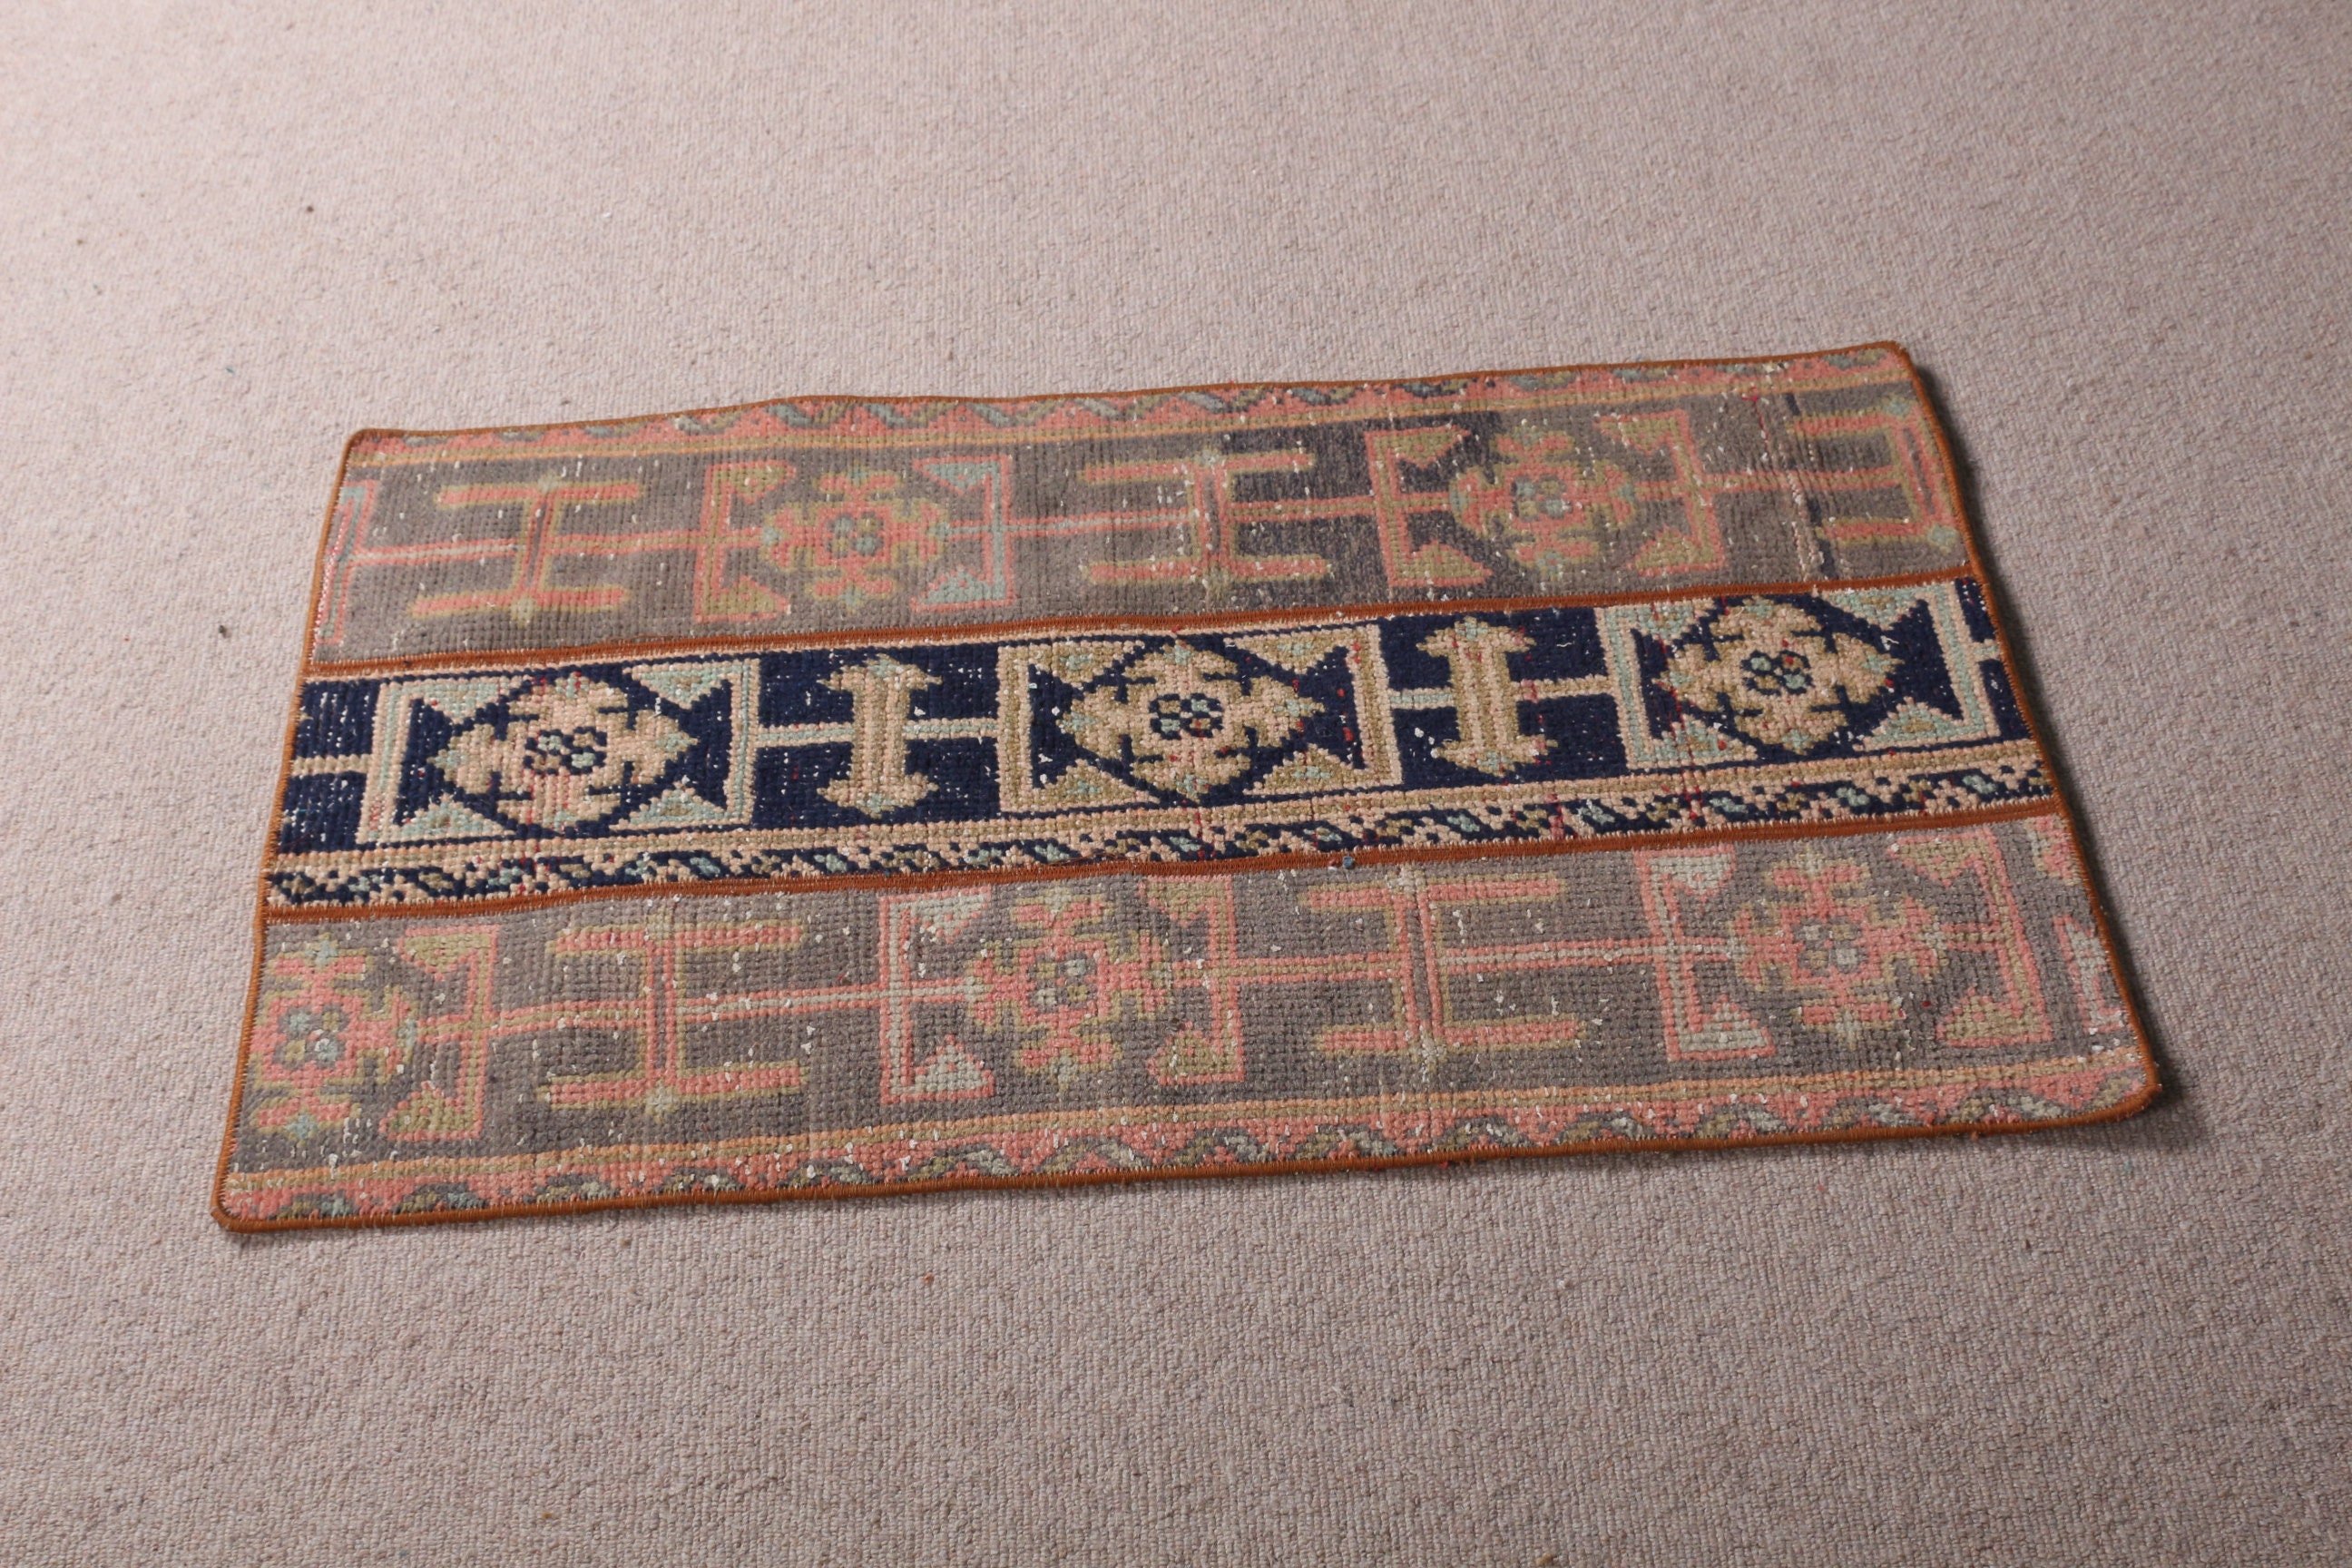 Bath Rug, Rugs for Car Mat, Oushak Rug, Vintage Rug, Anatolian Rugs, Blue Bedroom Rug, 1.9x3.3 ft Small Rugs, Kitchen Rug, Turkish Rugs